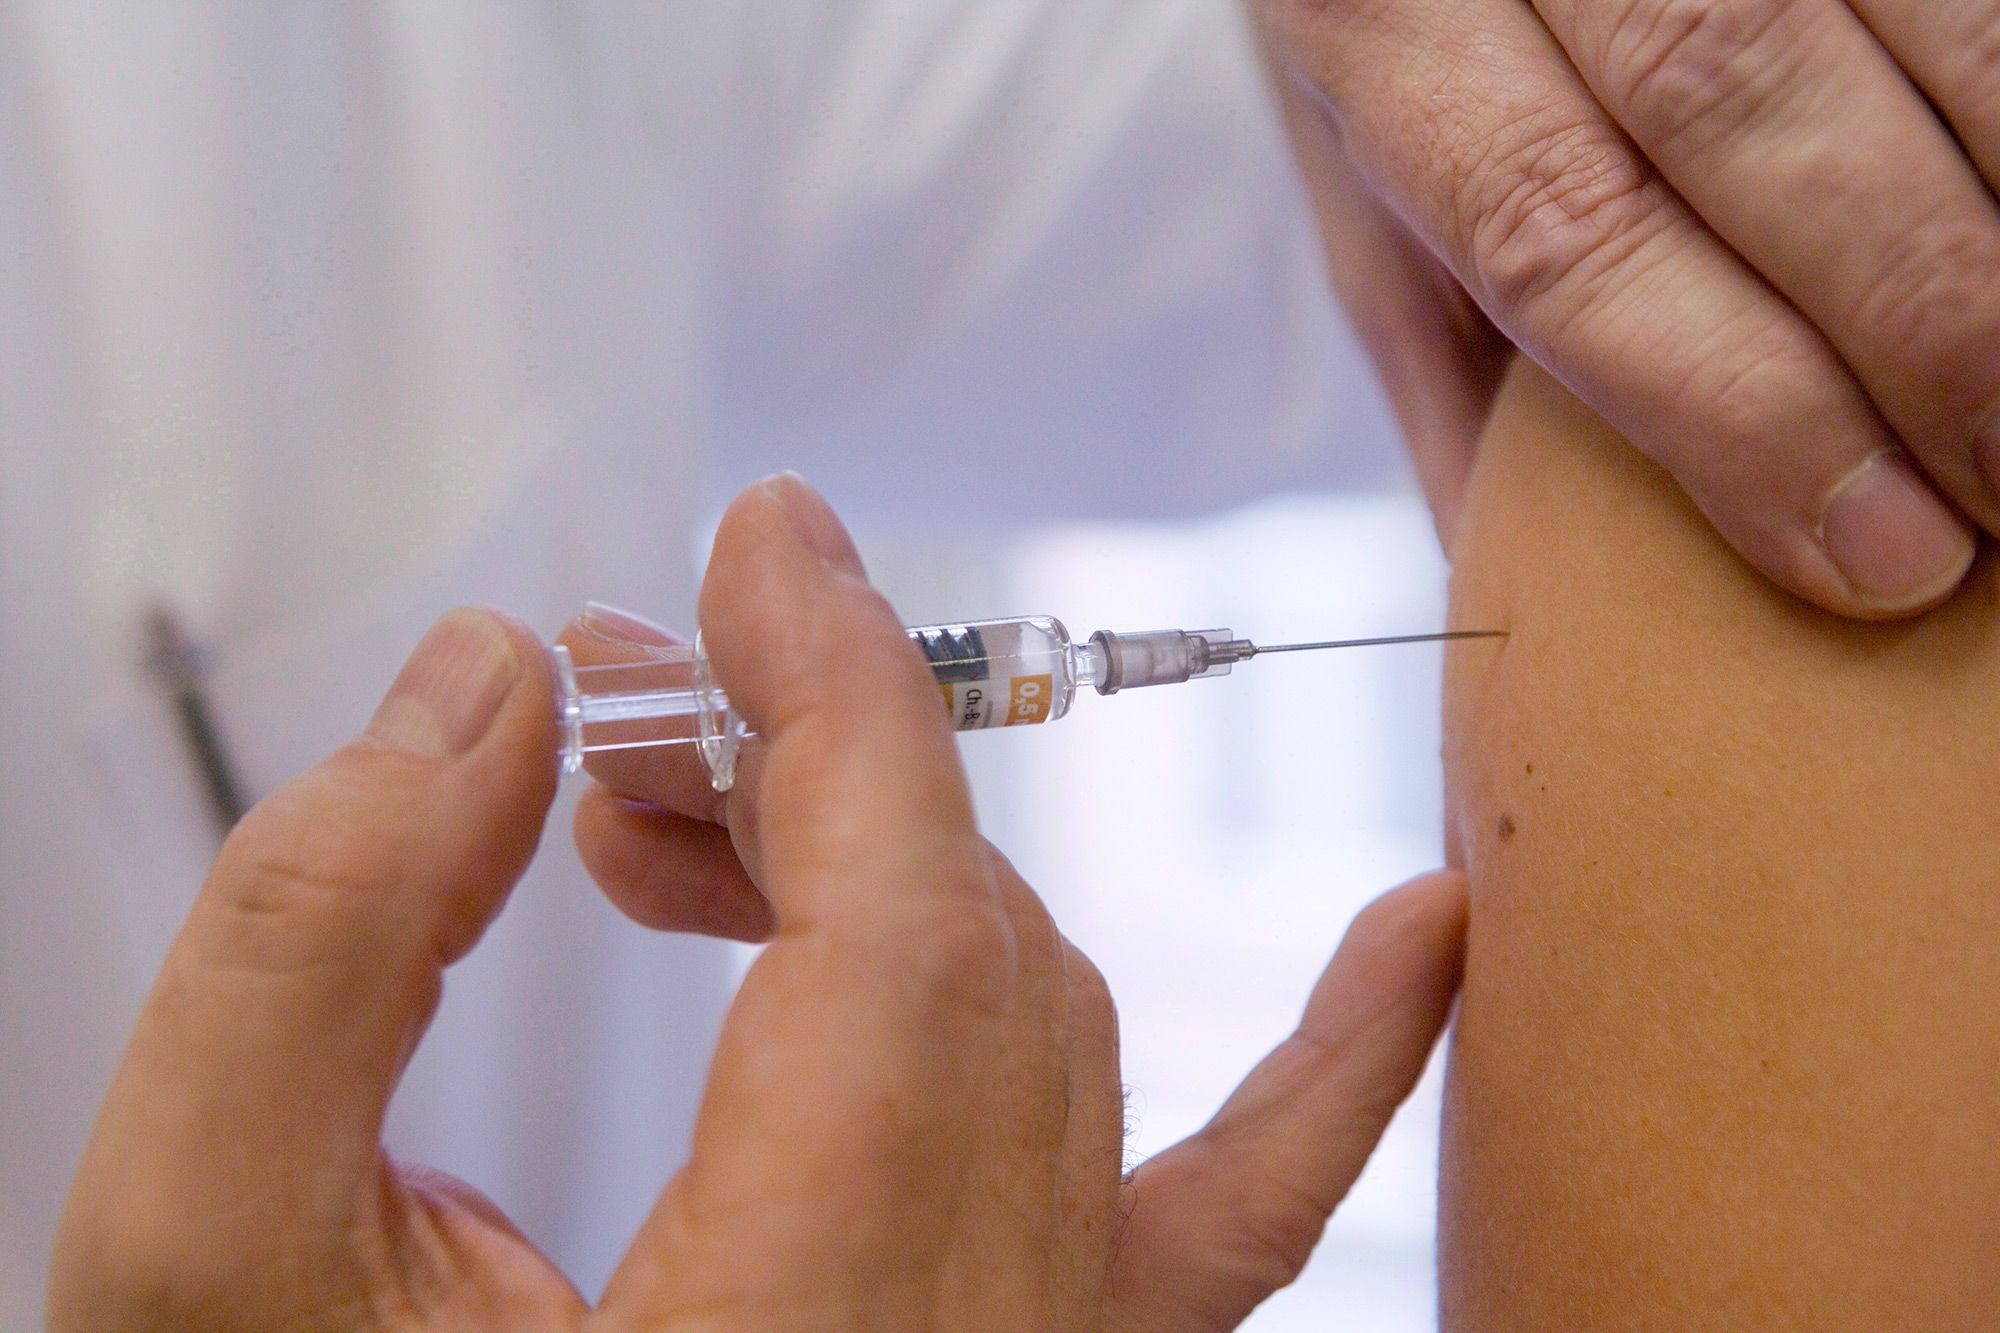 WHO study shows strong evidence HPV vaccine can prevent cervical cancer